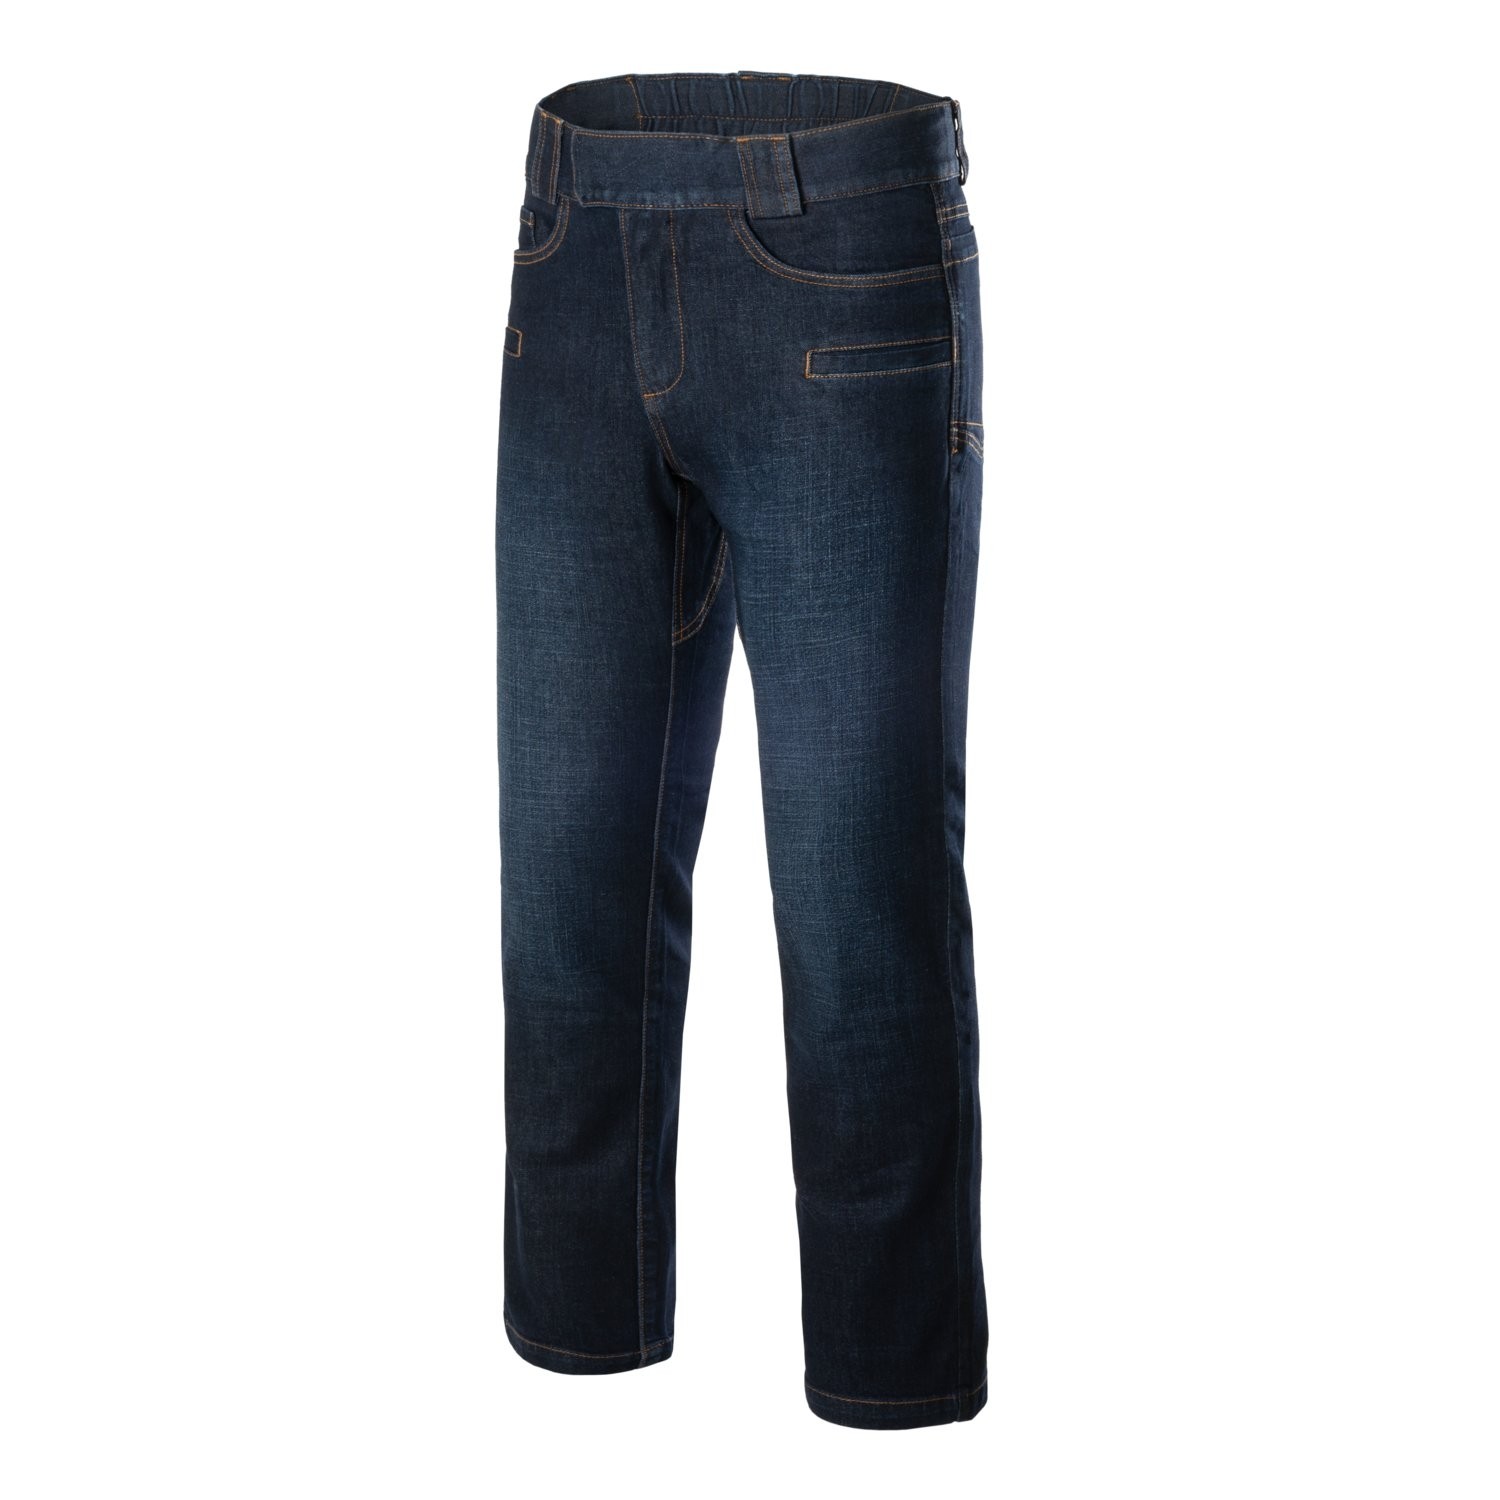 Side Elasticated Jeans at Cotton Traders